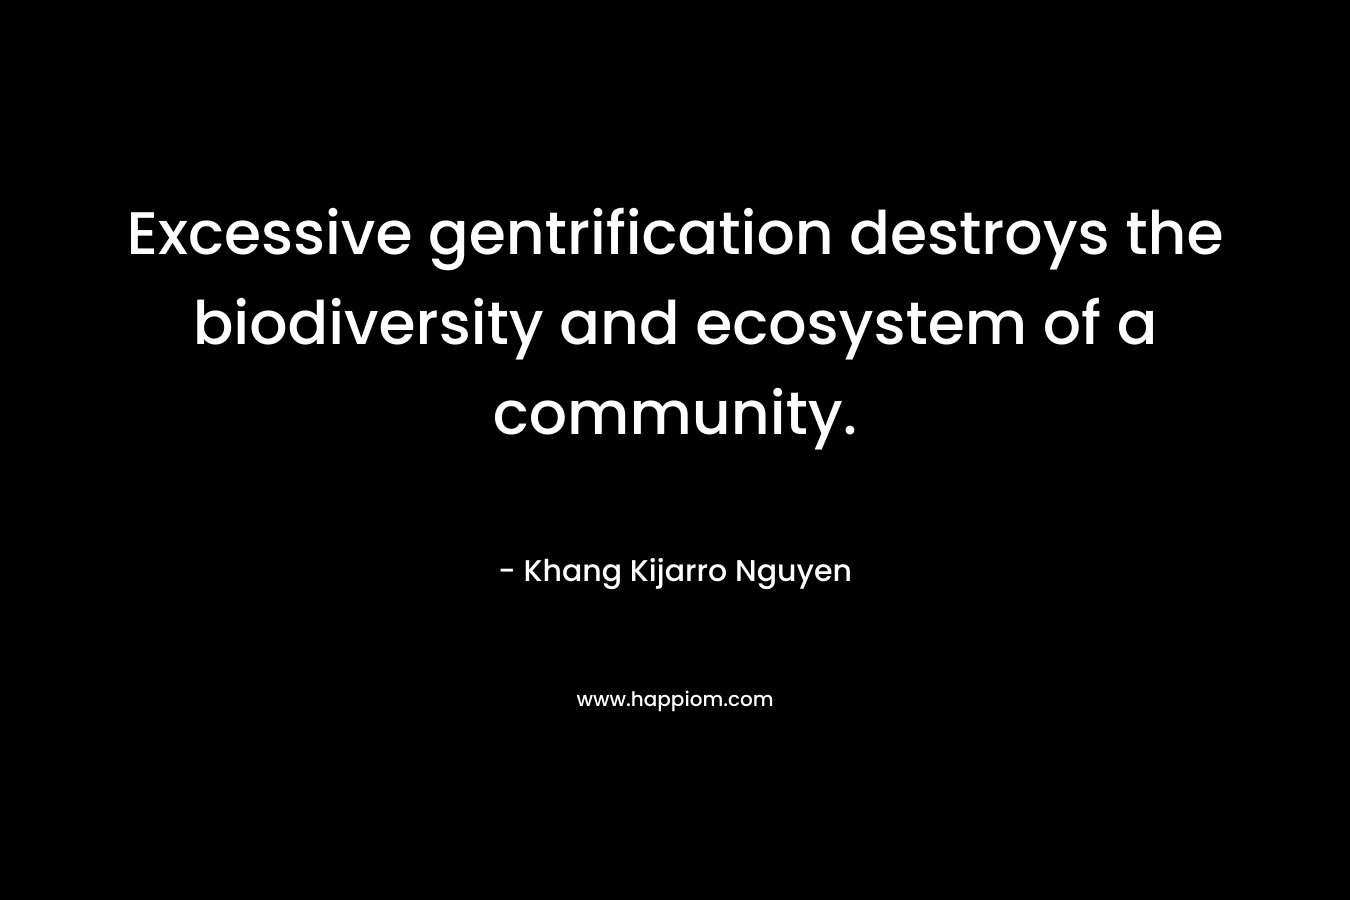 Excessive gentrification destroys the biodiversity and ecosystem of a community. – Khang Kijarro Nguyen